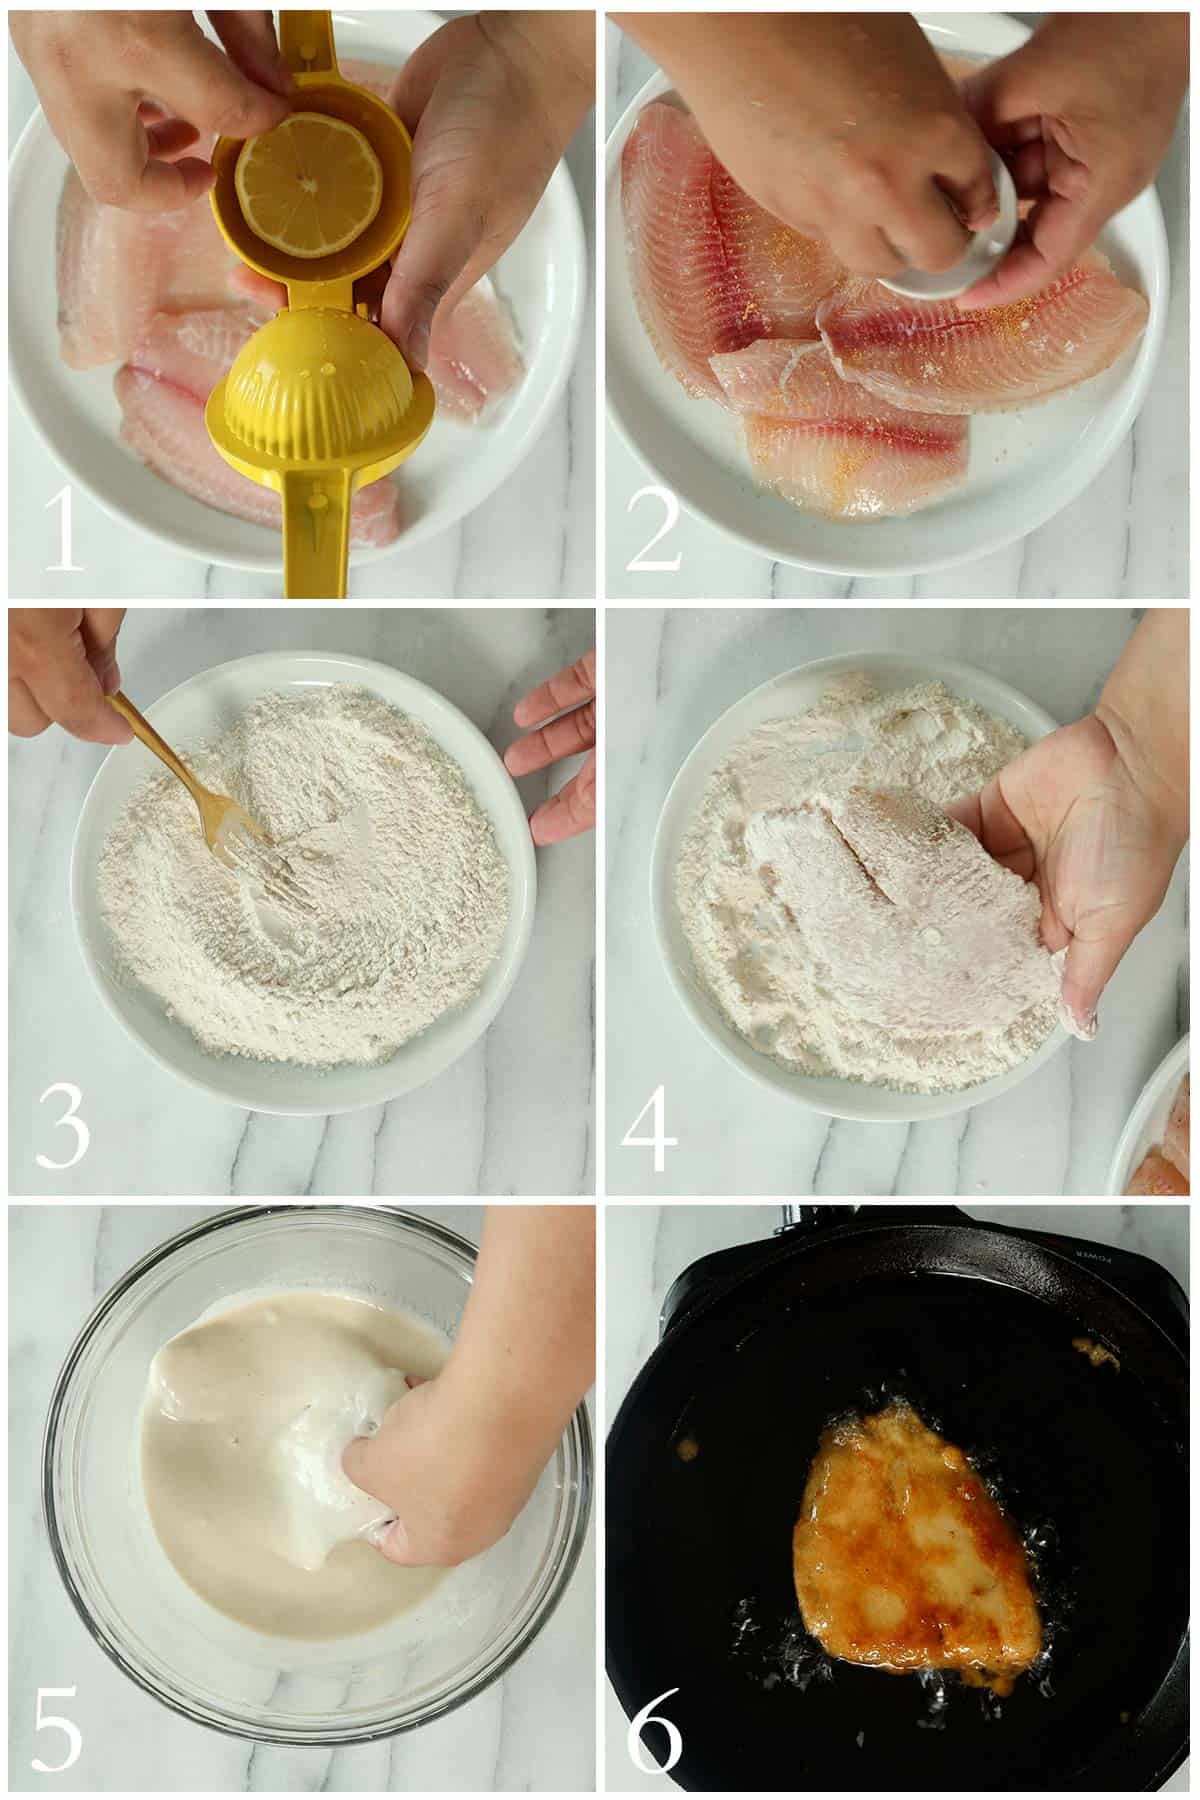 images of the steps to make fried tilapia.